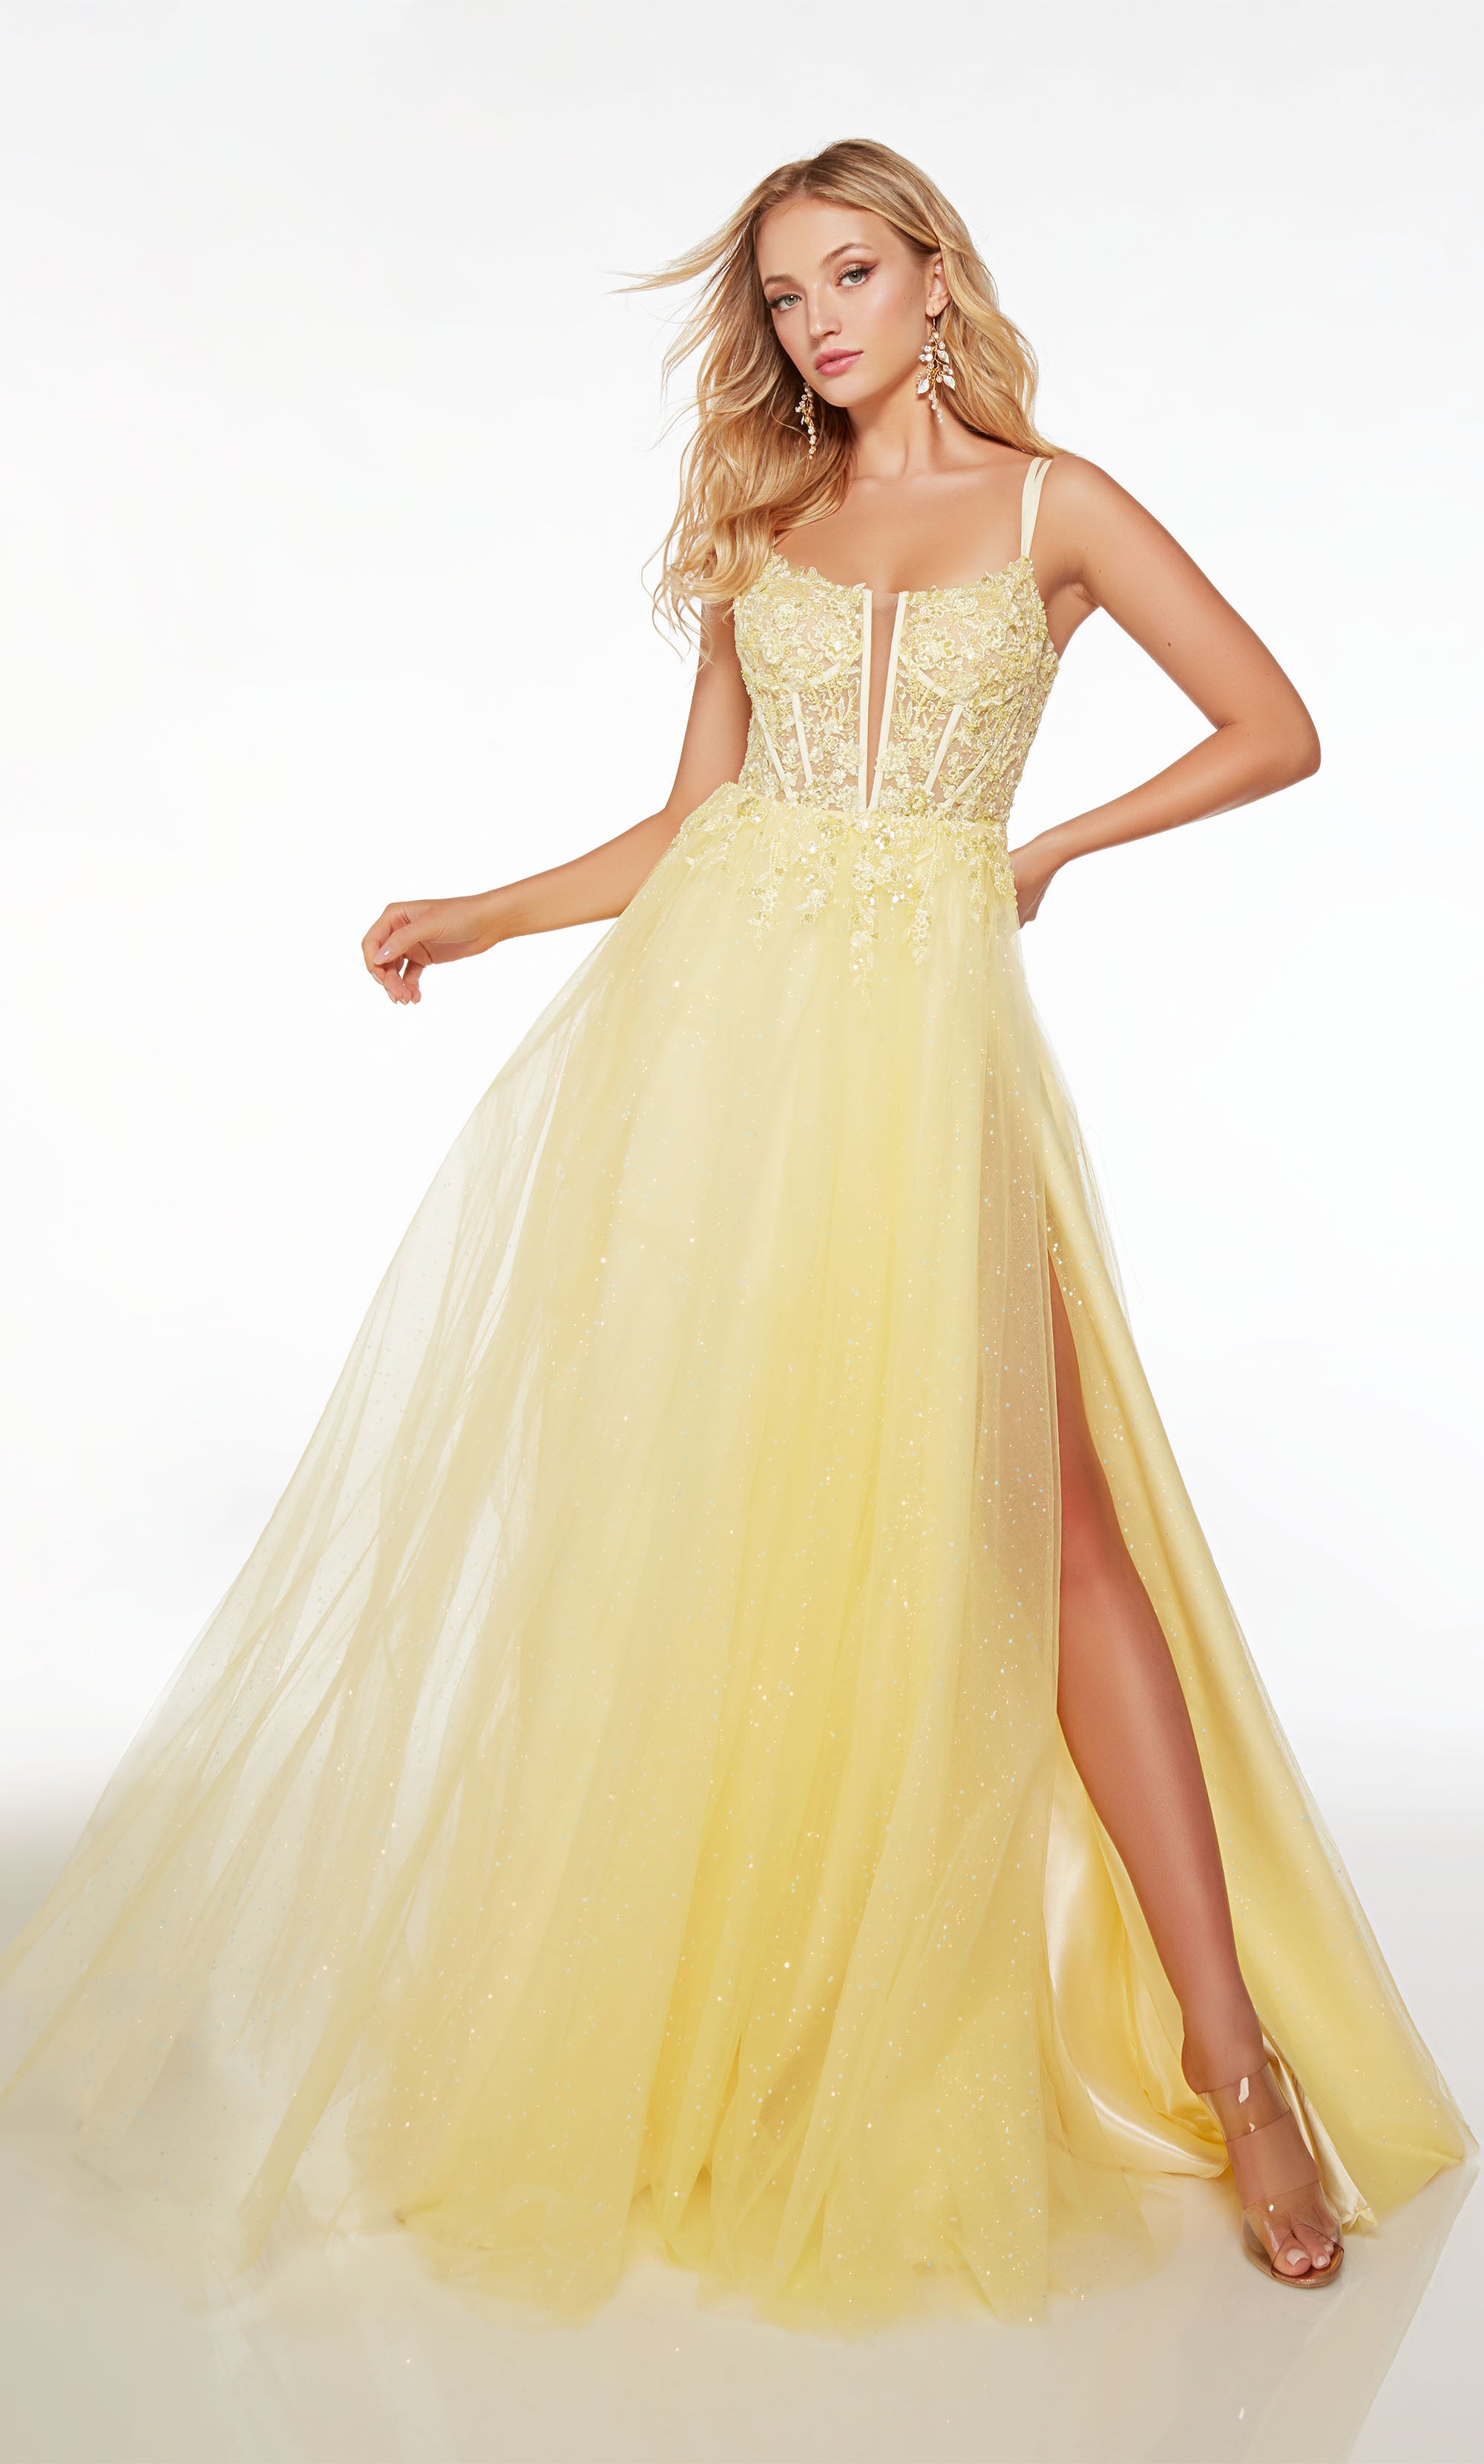 Flower Straps Yellow Corset Slit Prom Ball Gown